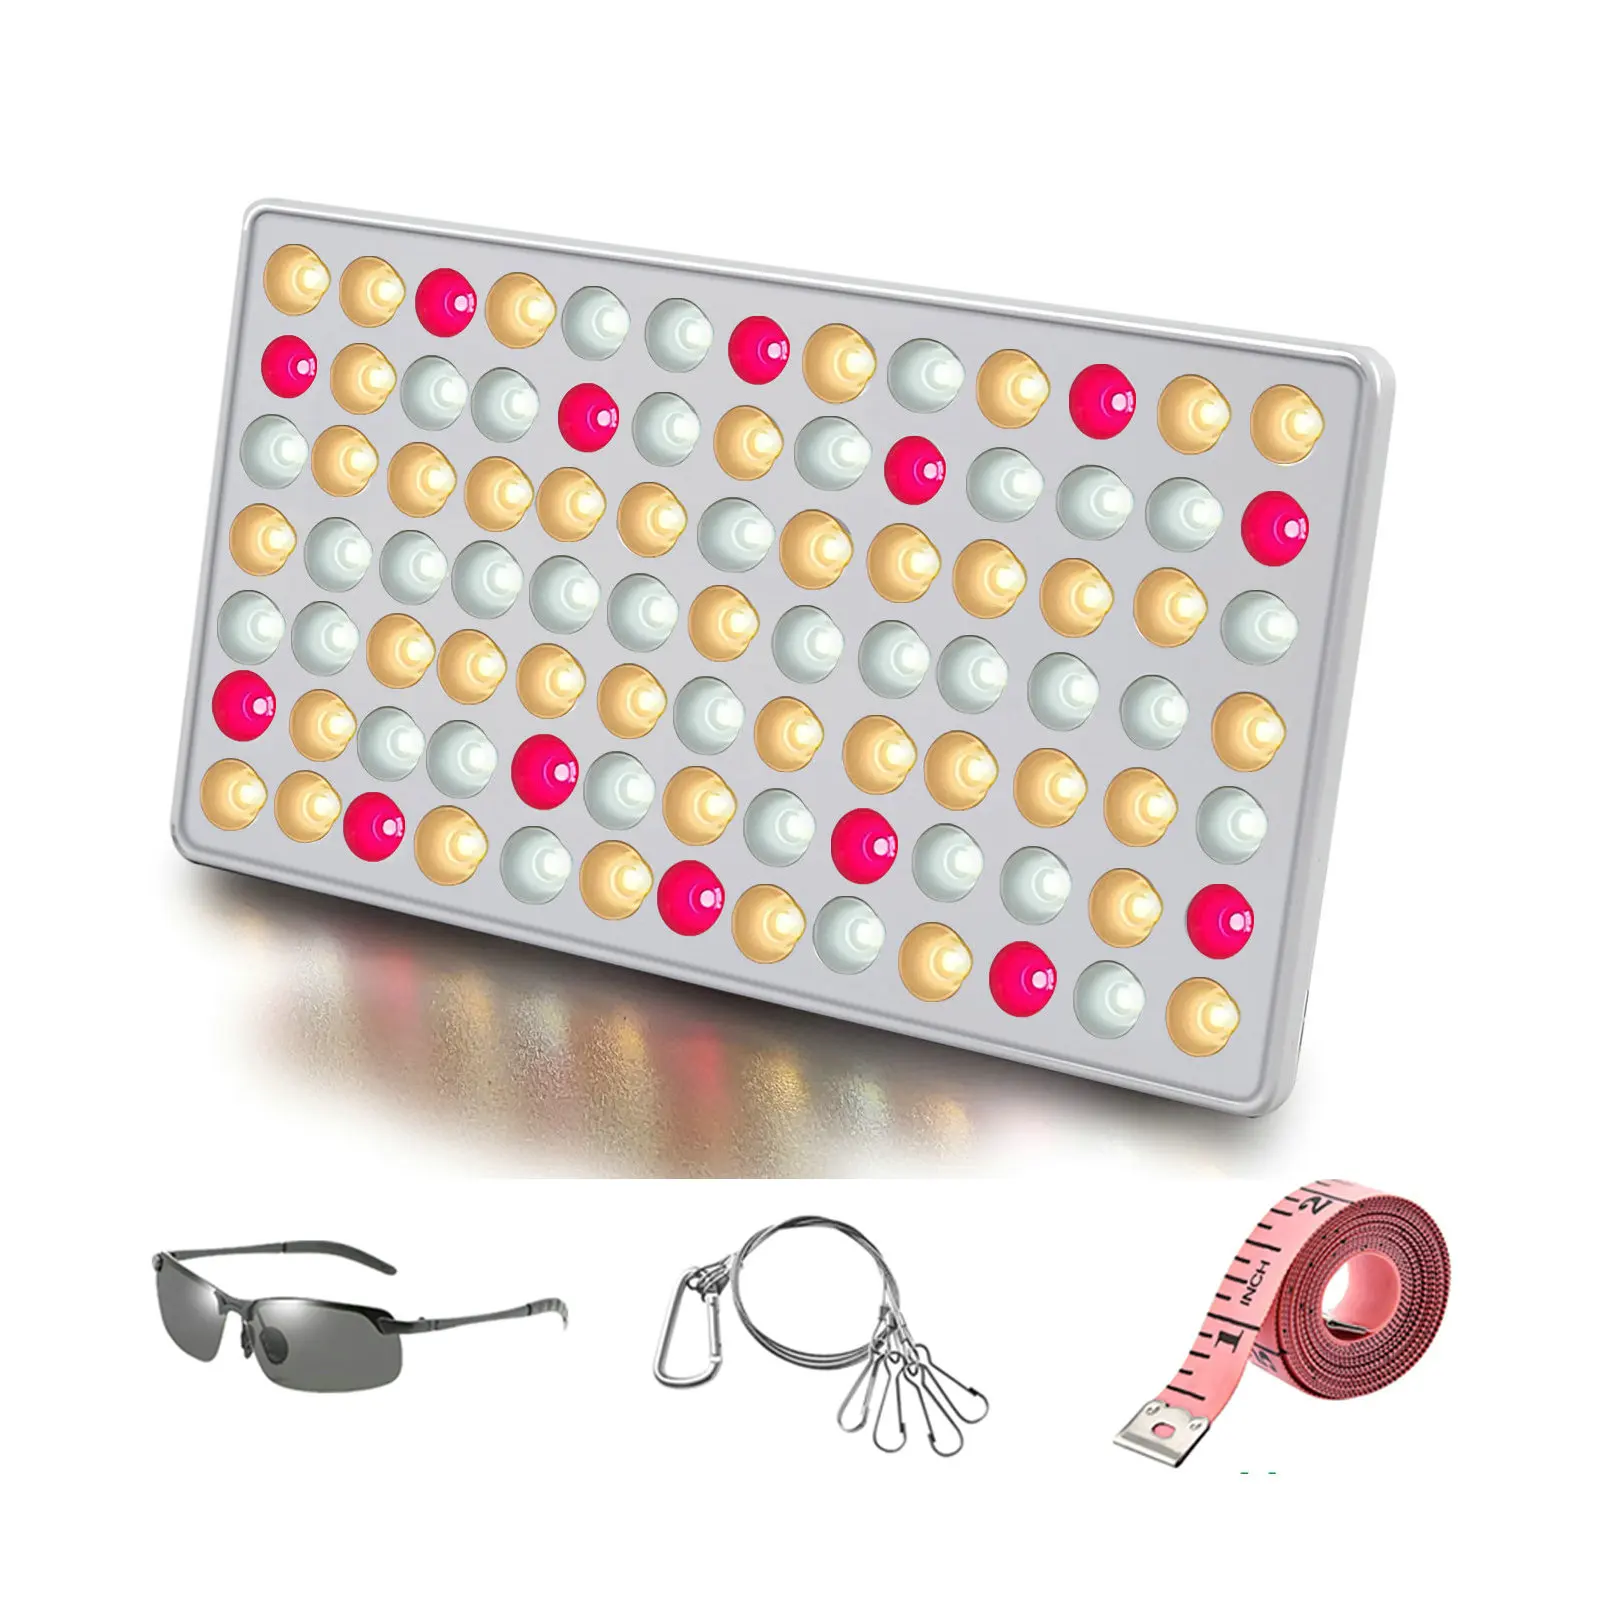 LM281B Quantum LED Grow Light Board 600W Full Spectrum Grow Lamp with Reflector for Indoor Plants Hydroponics System